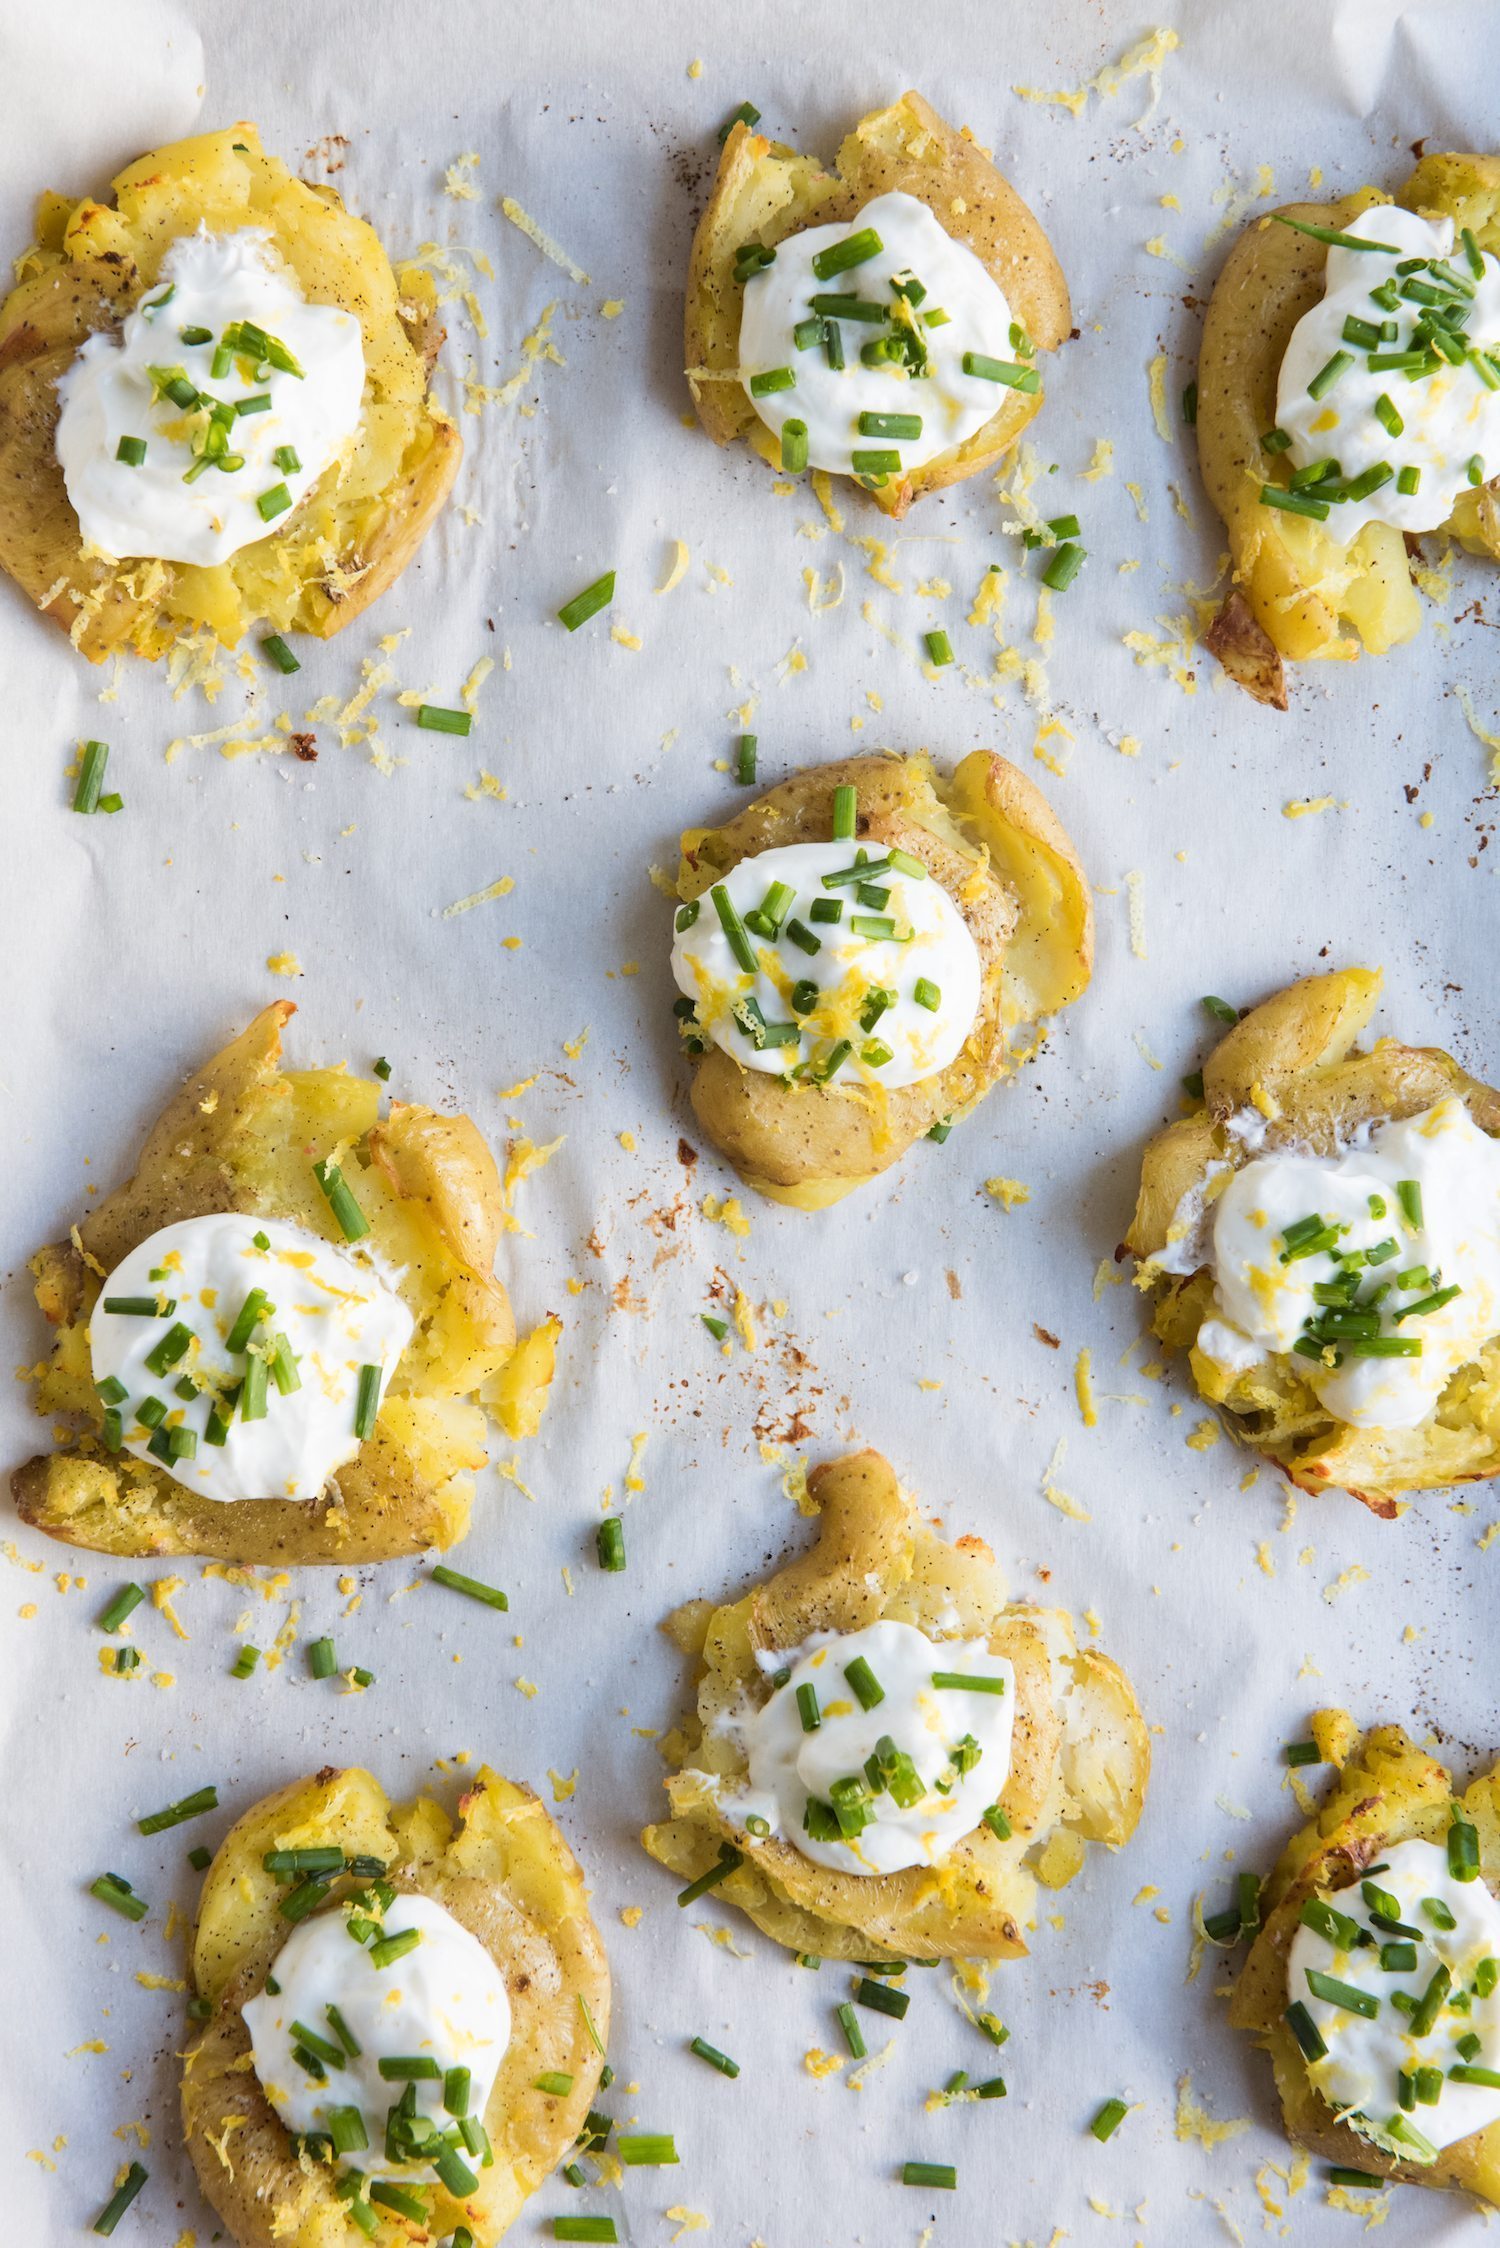 Lemon + Herb Smashed Potatoes with Greek Yogurt | Party recipes, entertaining tips, easy party appetizers, party ideas and more from @cydconverse